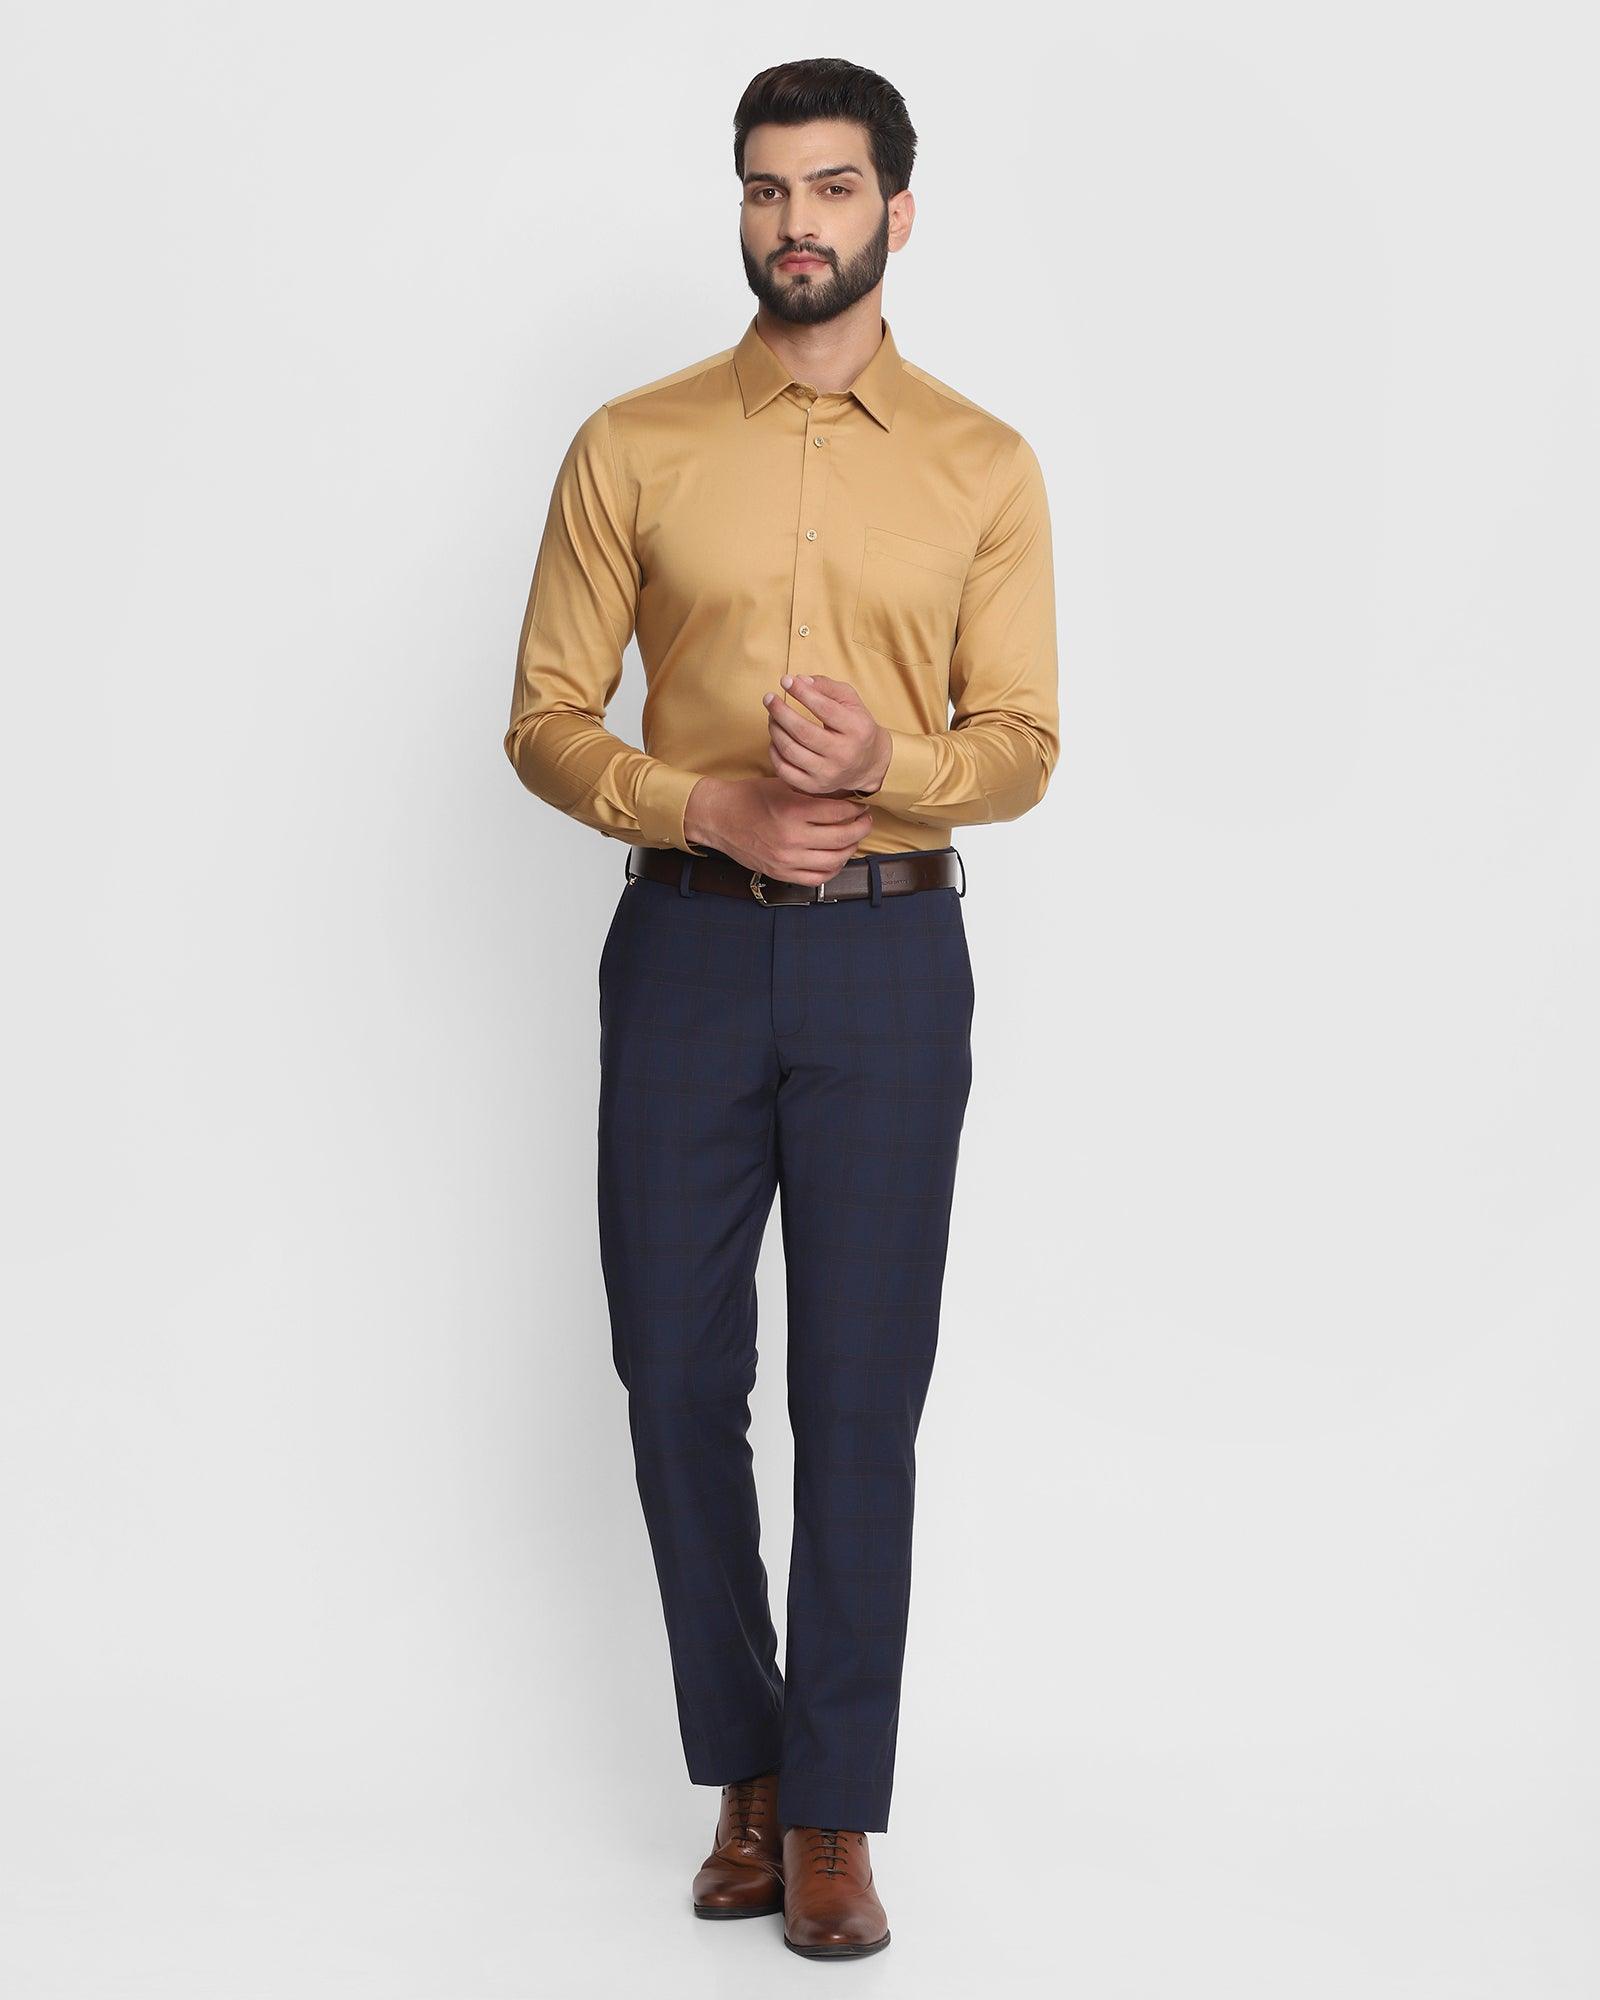 Formal Tobacco Brown Solid Shirt - Zylor